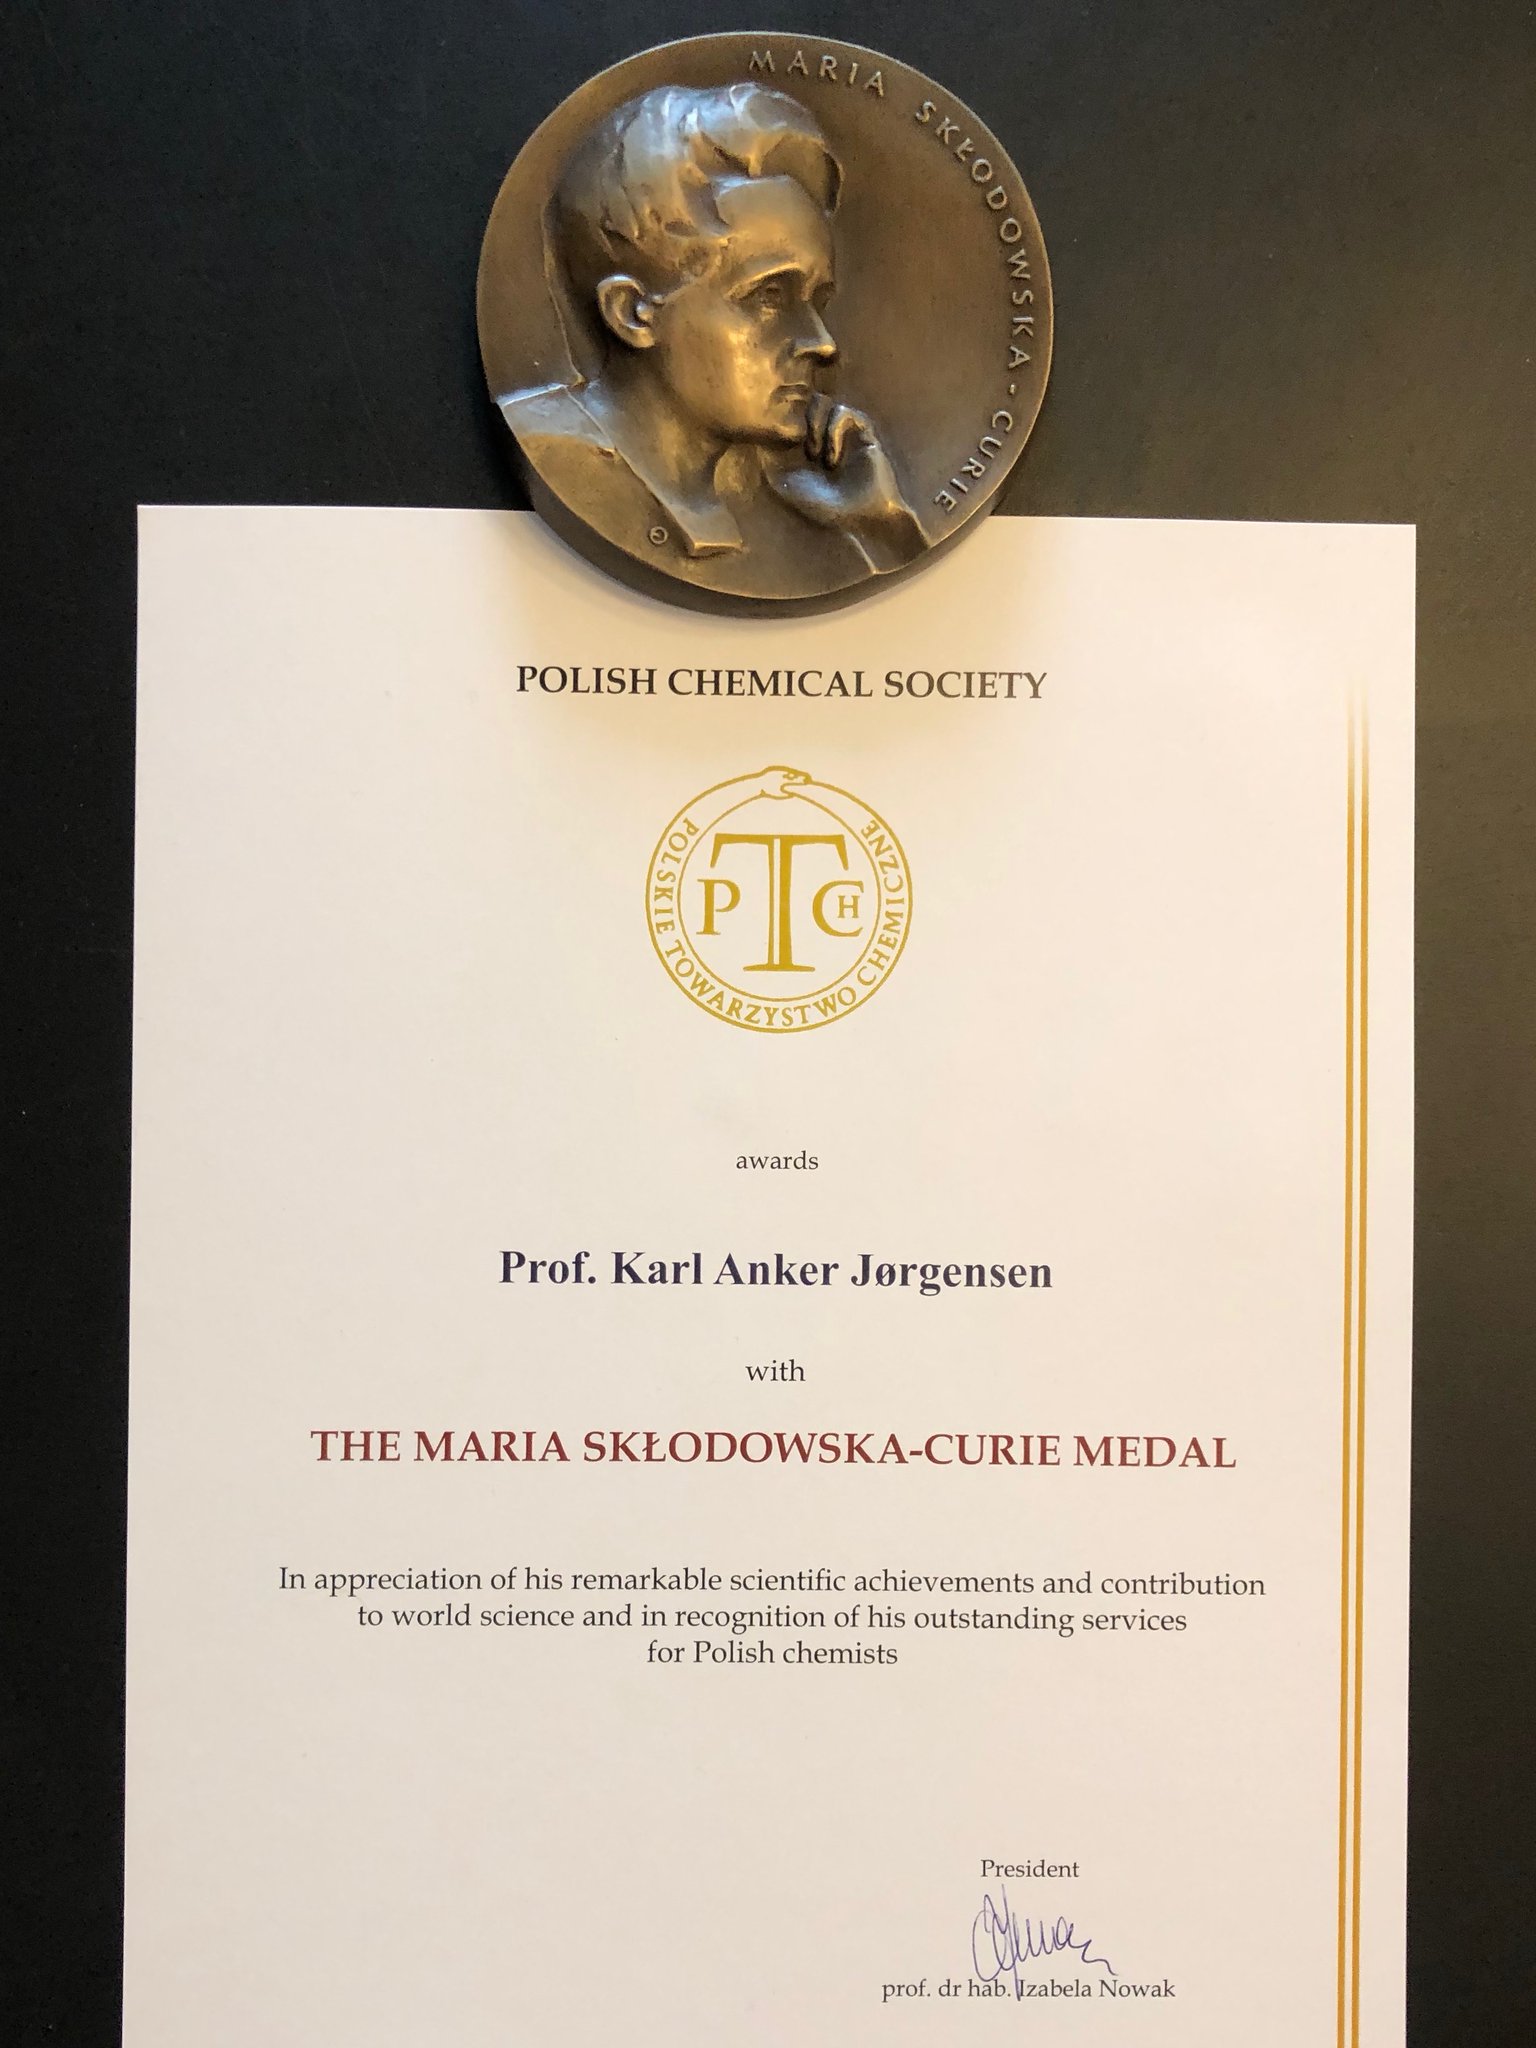 Jørgensen Group on Twitter: Anker is honored to join Roald Ada Yonath, Ben Feringa and other great scientists in receiving the #MarieCurie Medal from the Polish Chemical Society. Congratulations from the entire group! @AarhusUni ...